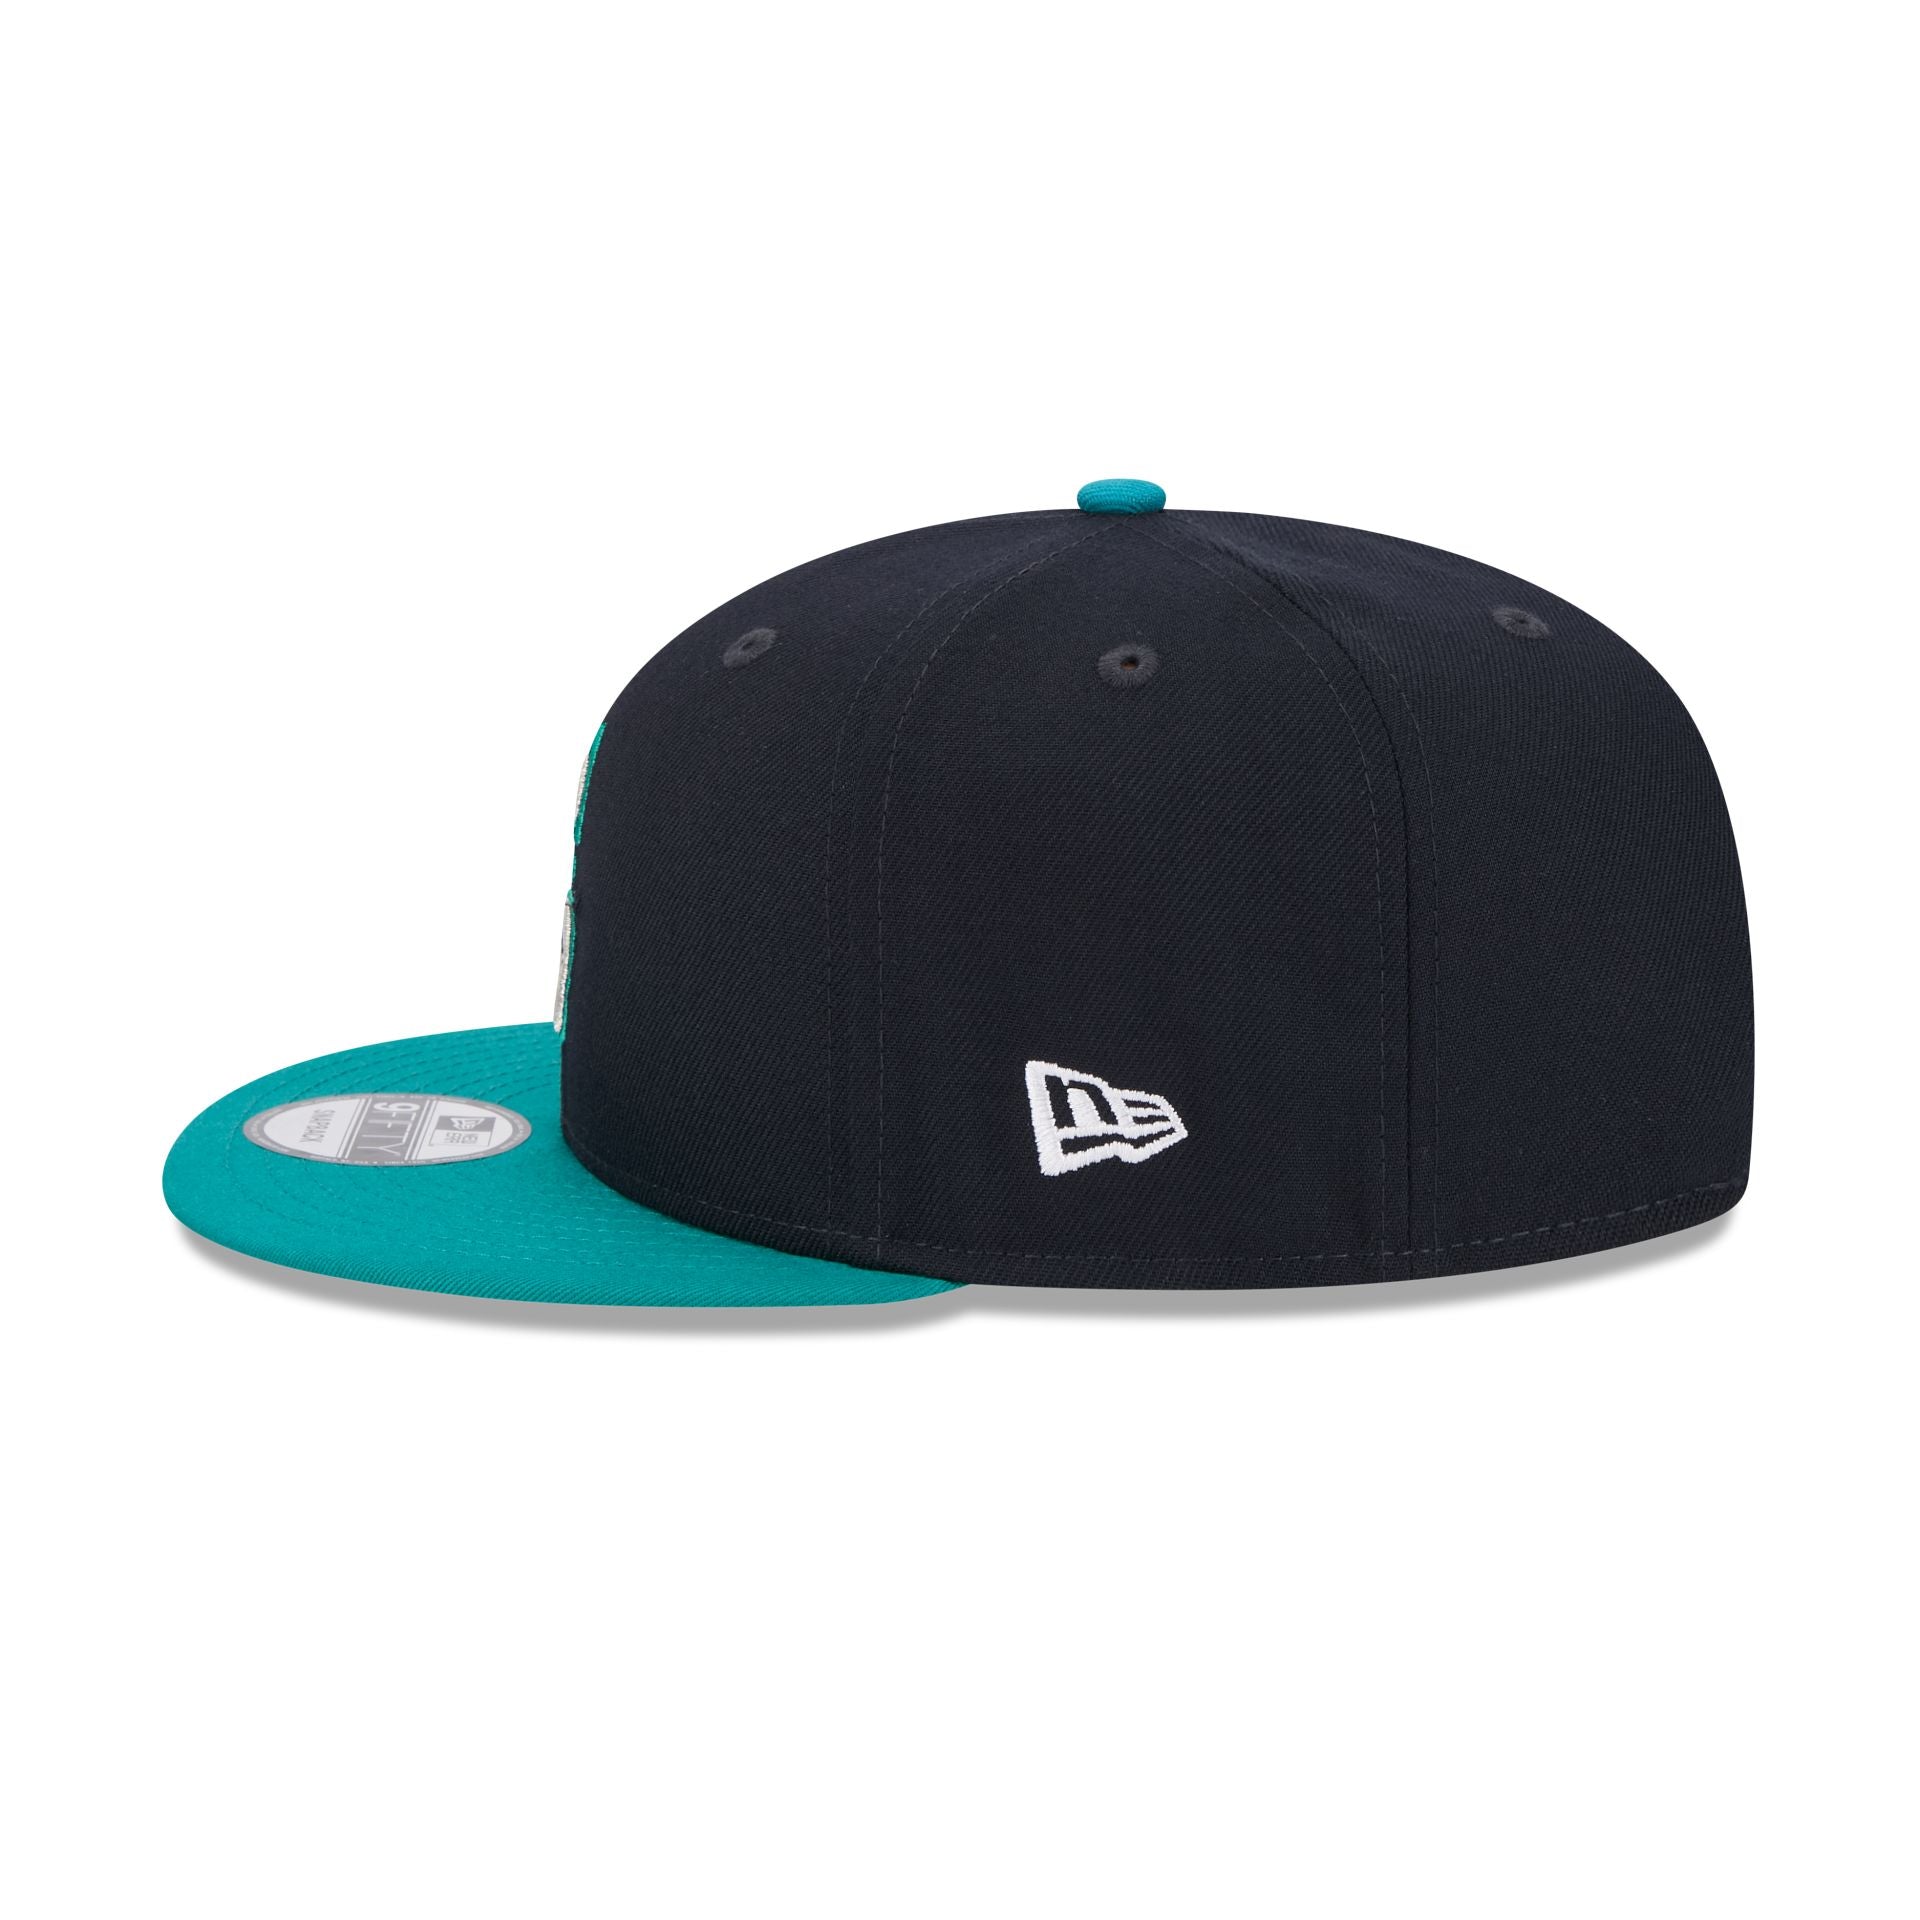 Seattle Mariners Cooperstown 9FIFTY Snapback Hat – New Era Cap